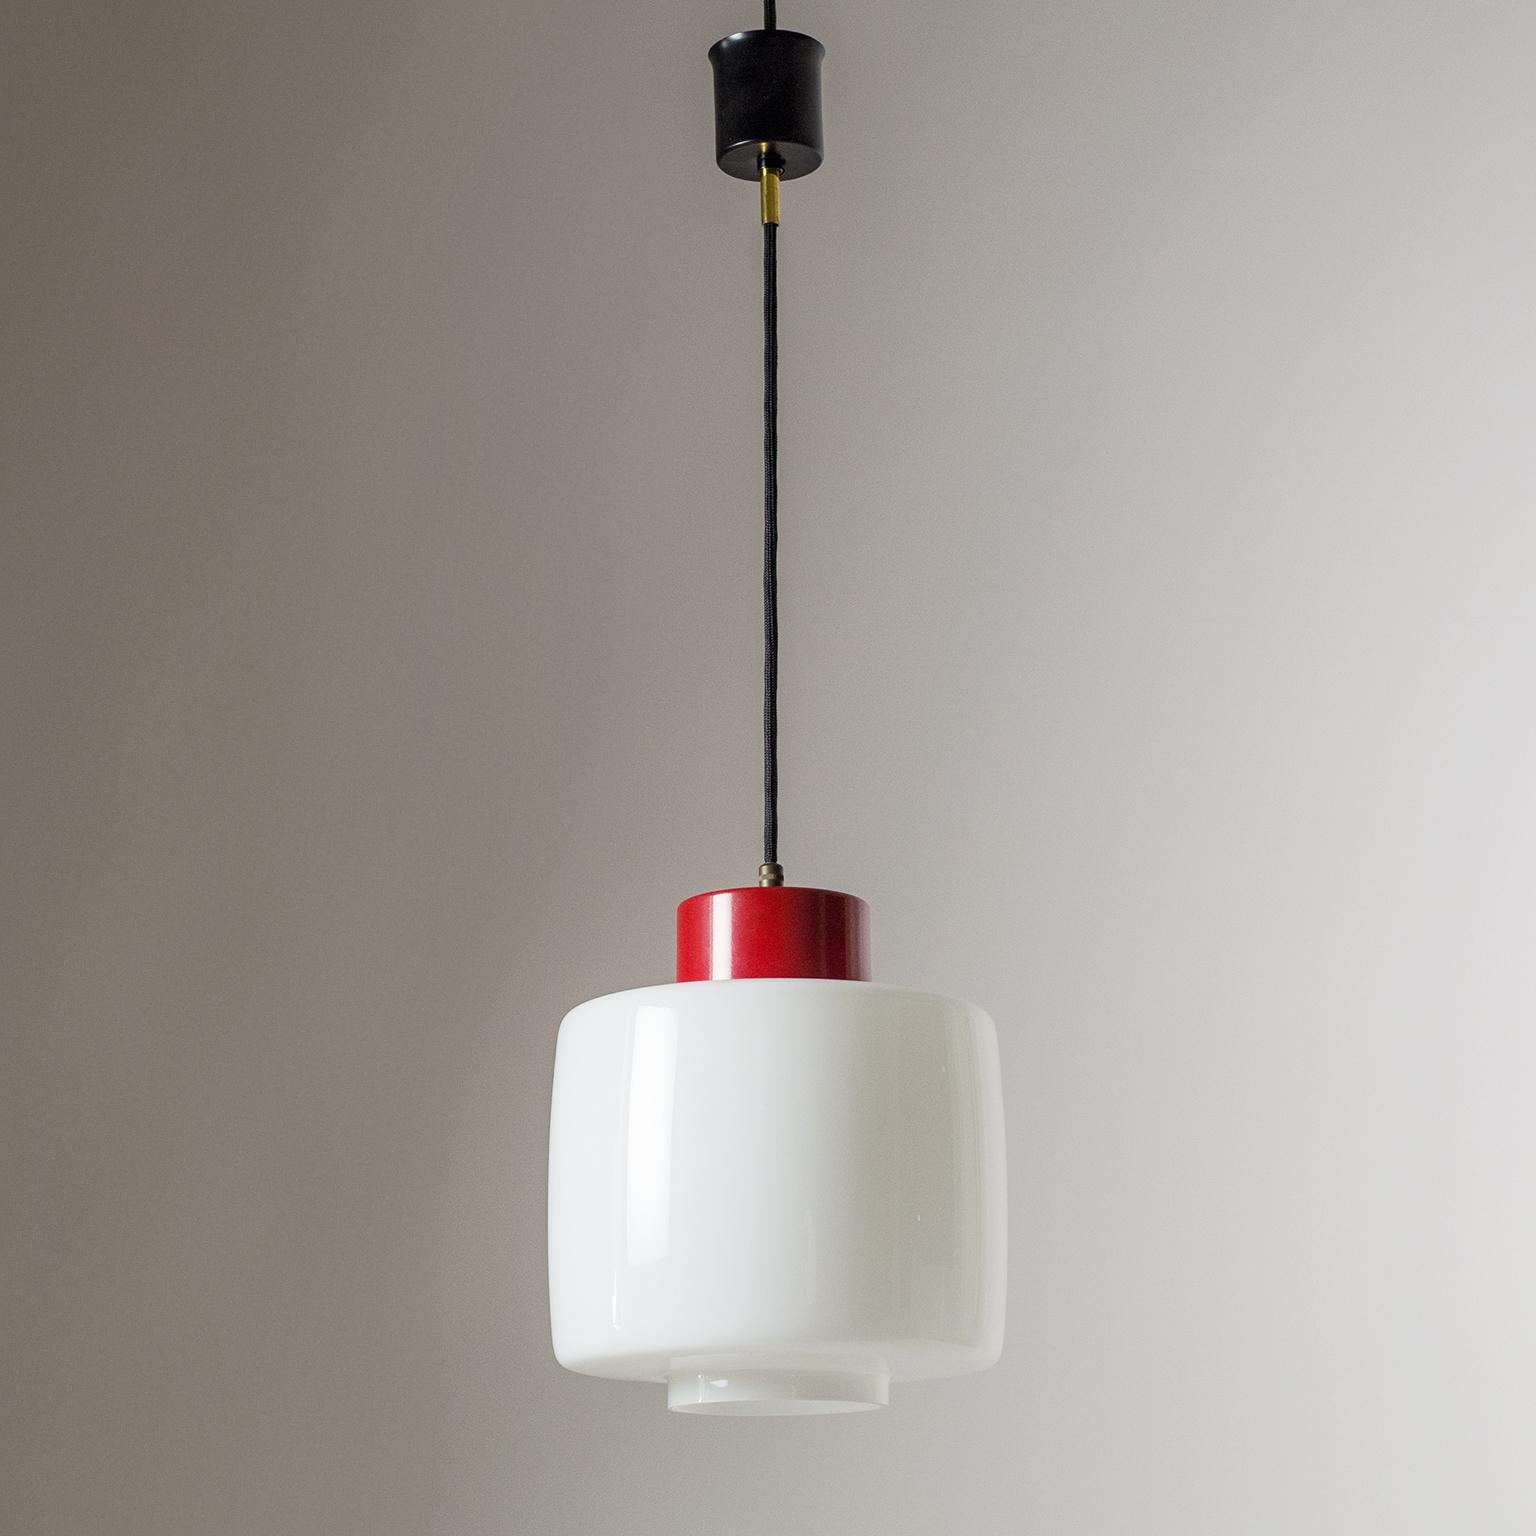 Classic modernist Stilnovo pendant from the 1950s. The blown glass has a total of four layers, alternating between clear and white casing, and a red lacquered 'cap' which houses the original E27 socket with new textile wiring. Drop height is